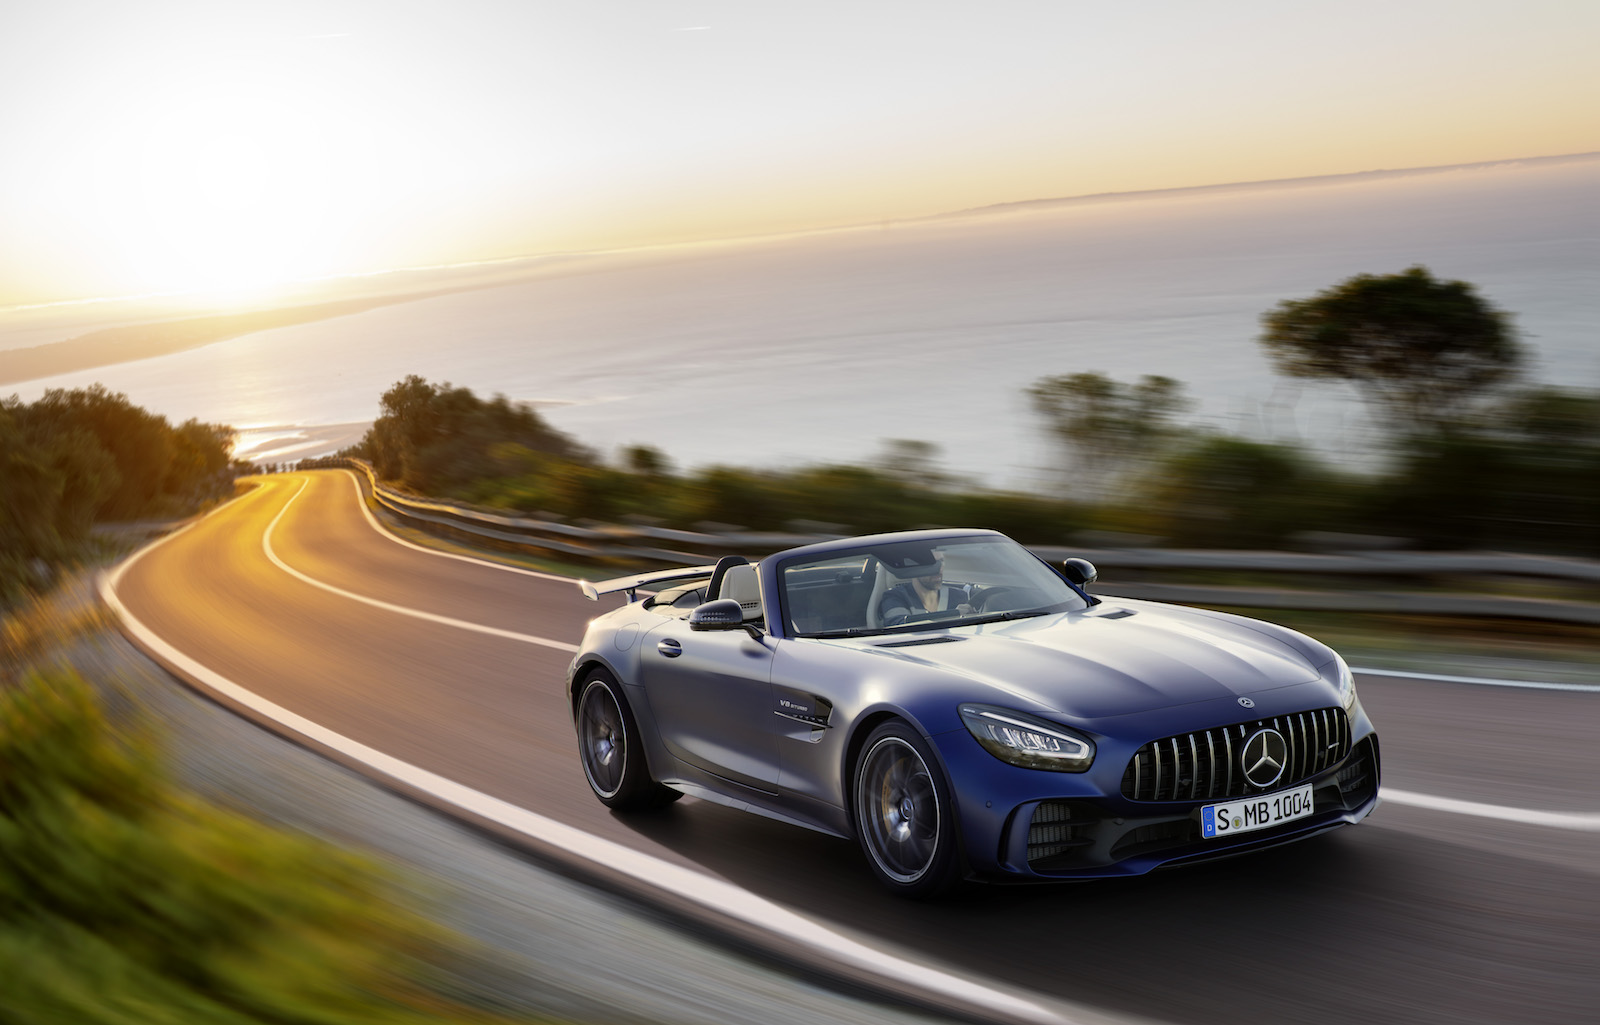 Mercedes Amg Gt R Roadster Utilizes Aluminum For Lightweighting Safety And Agility Light Metal Age Magazine